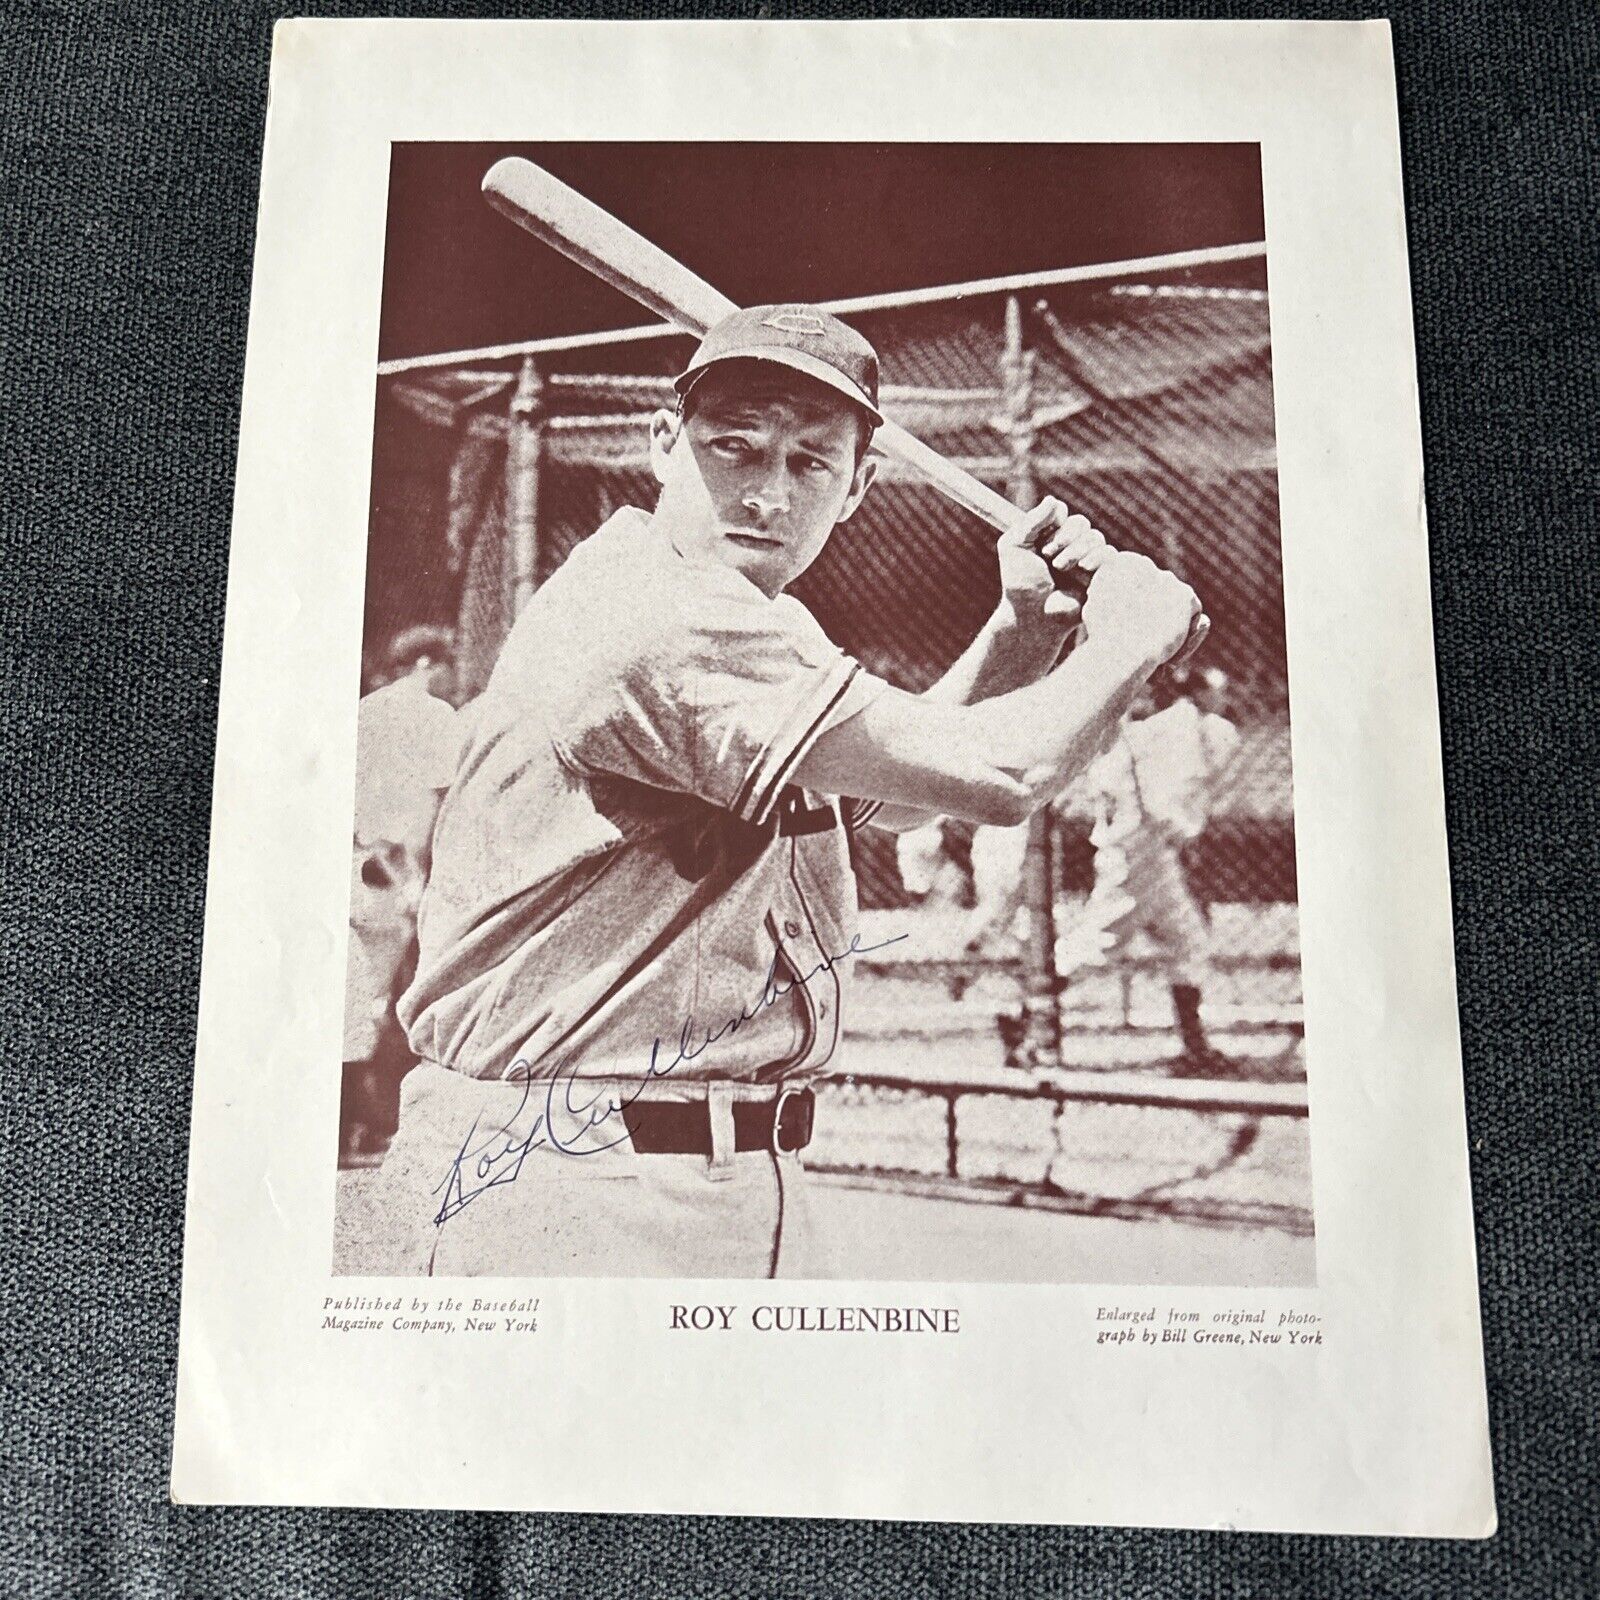 Roy Cullenbine MLB  Autographed Signed Photo 9.5x12